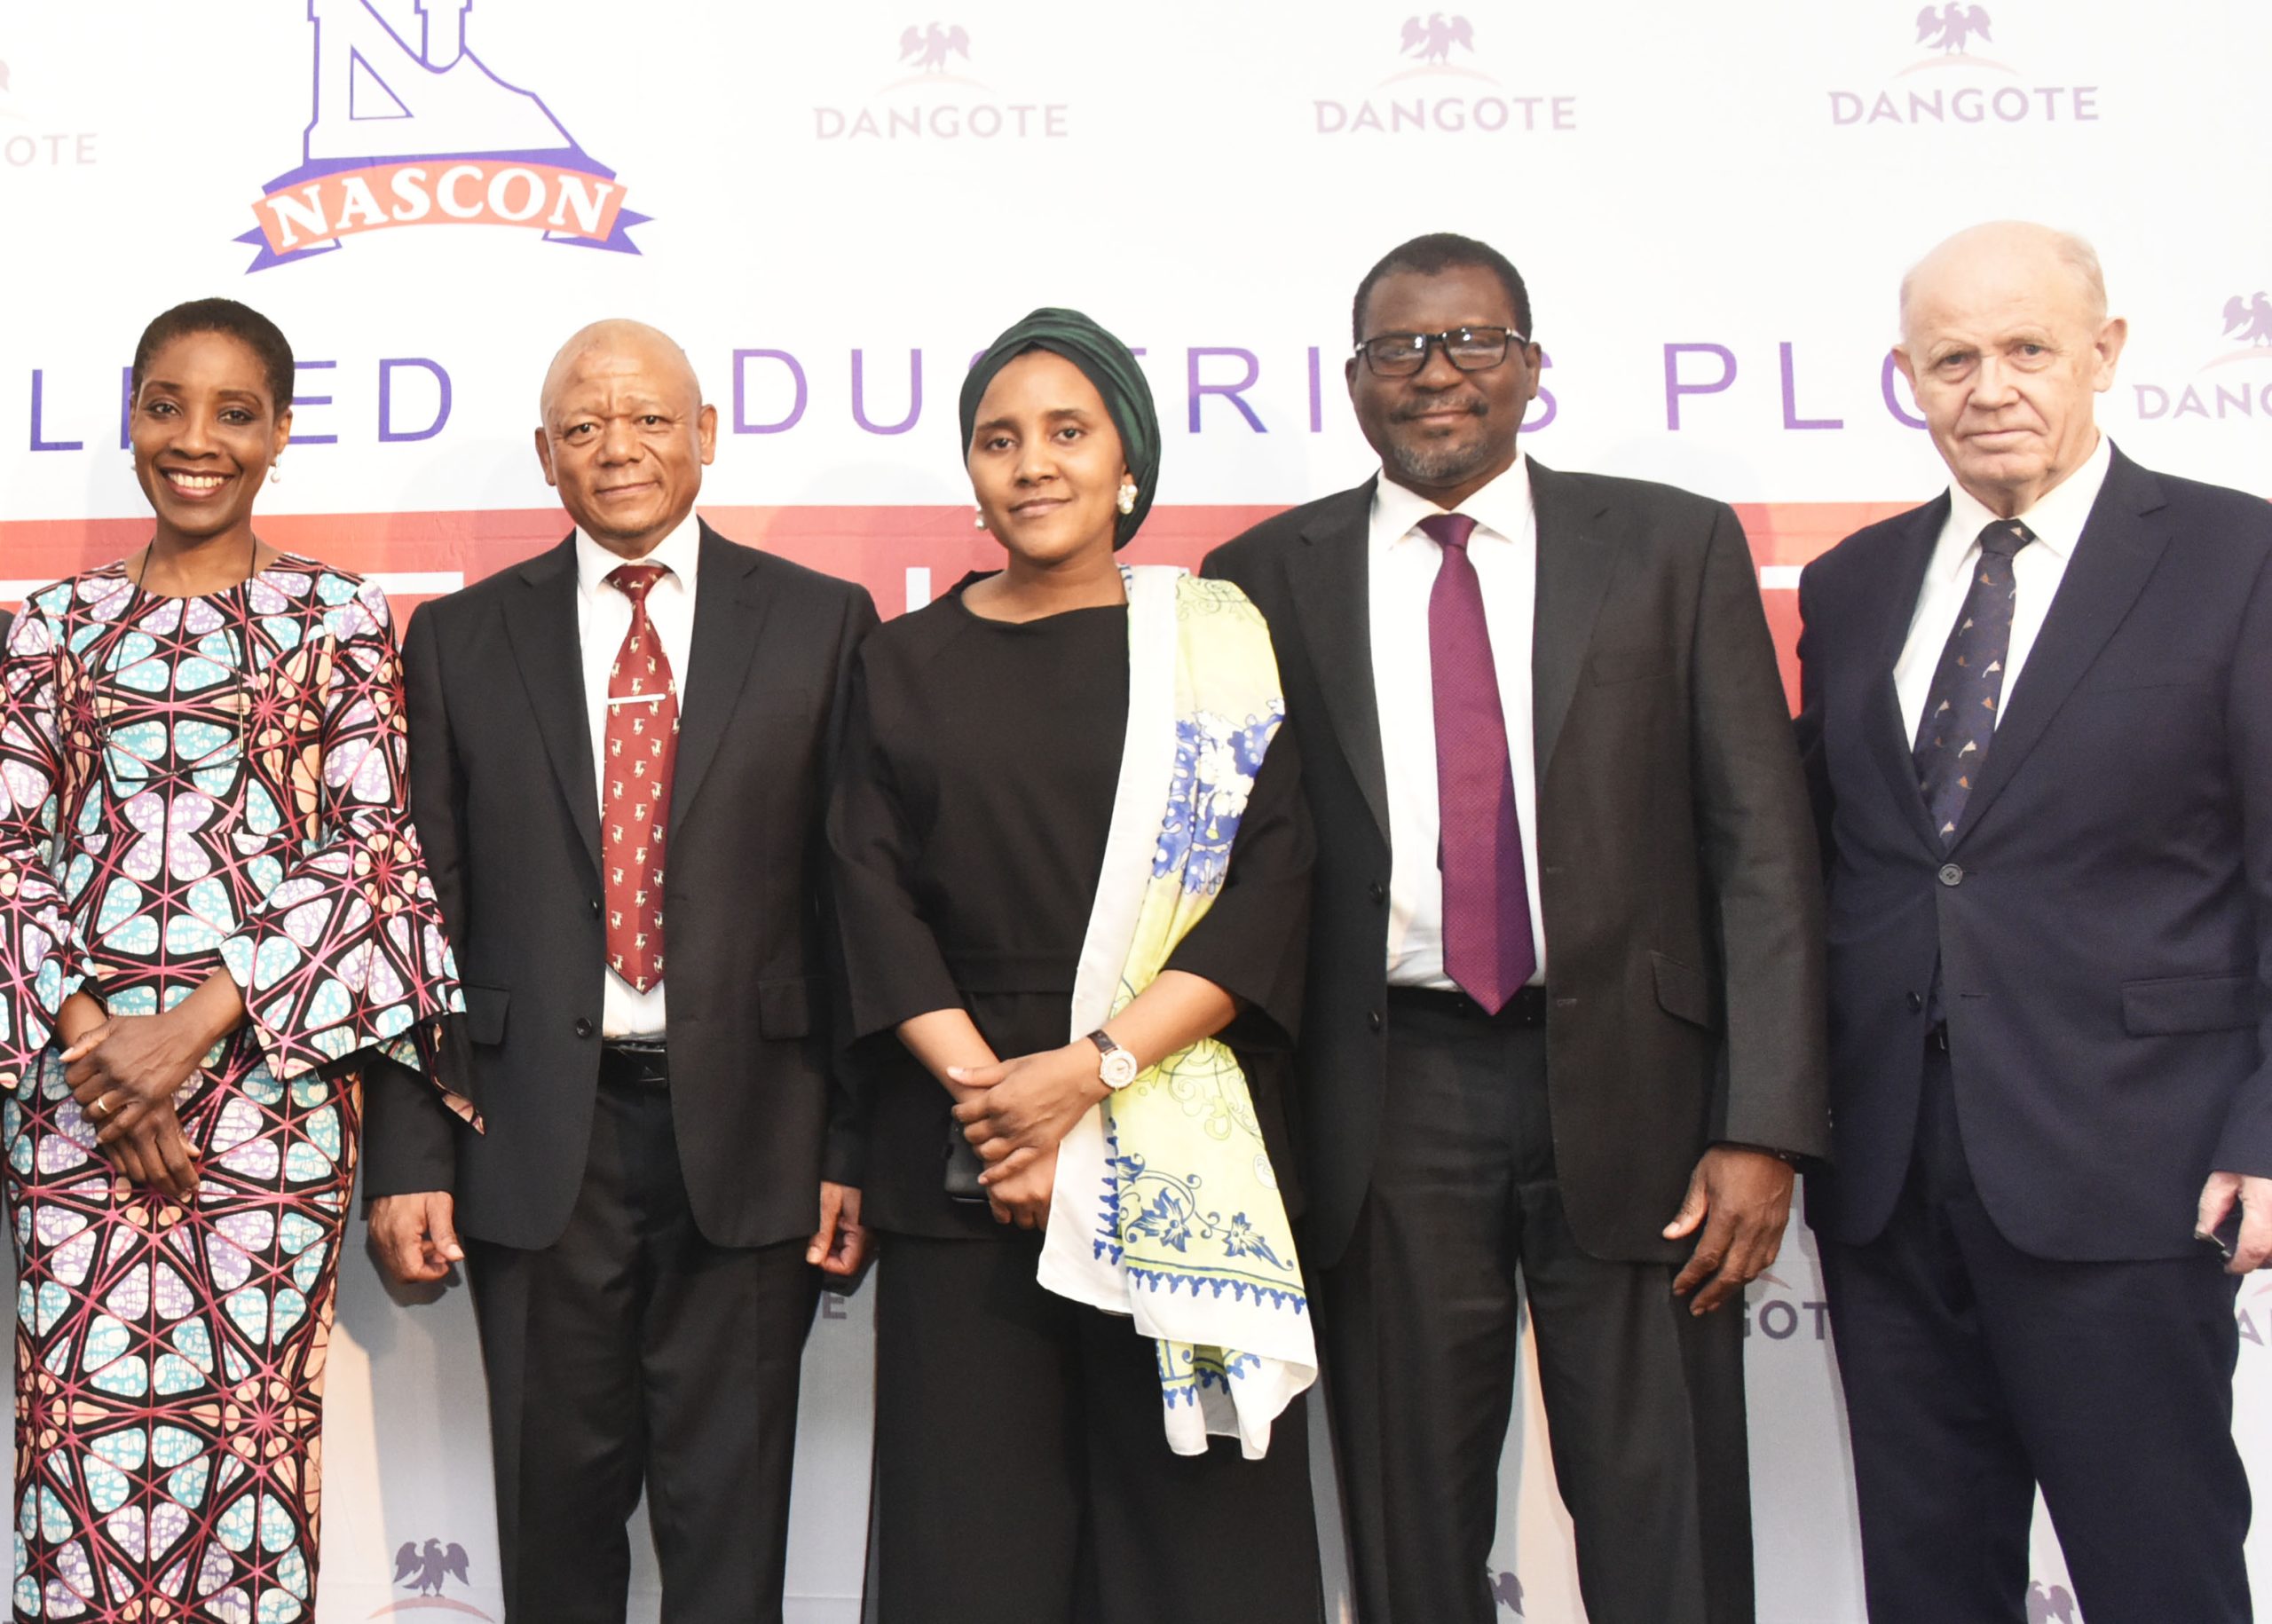 L-R: Chairperson, NASCON Allied Industries Plc, 'Yemisi Ayeni; Acting Managing Director, NASCON Allied Industries Plc, Thabo Mabe; and Executive Director, Commercial, NASCON Allied Industries Plc, Fatima Aliko-Dangote; Director, NASCON Allied Industries Plc, Abdu Dantata; Director, NASCON Allied Industries Plc, Knut Ulvmoen, at the 2021 Annual General Meeting (AGM) of NASCON Allied Industries Plc in Lagos on June 3, 2022